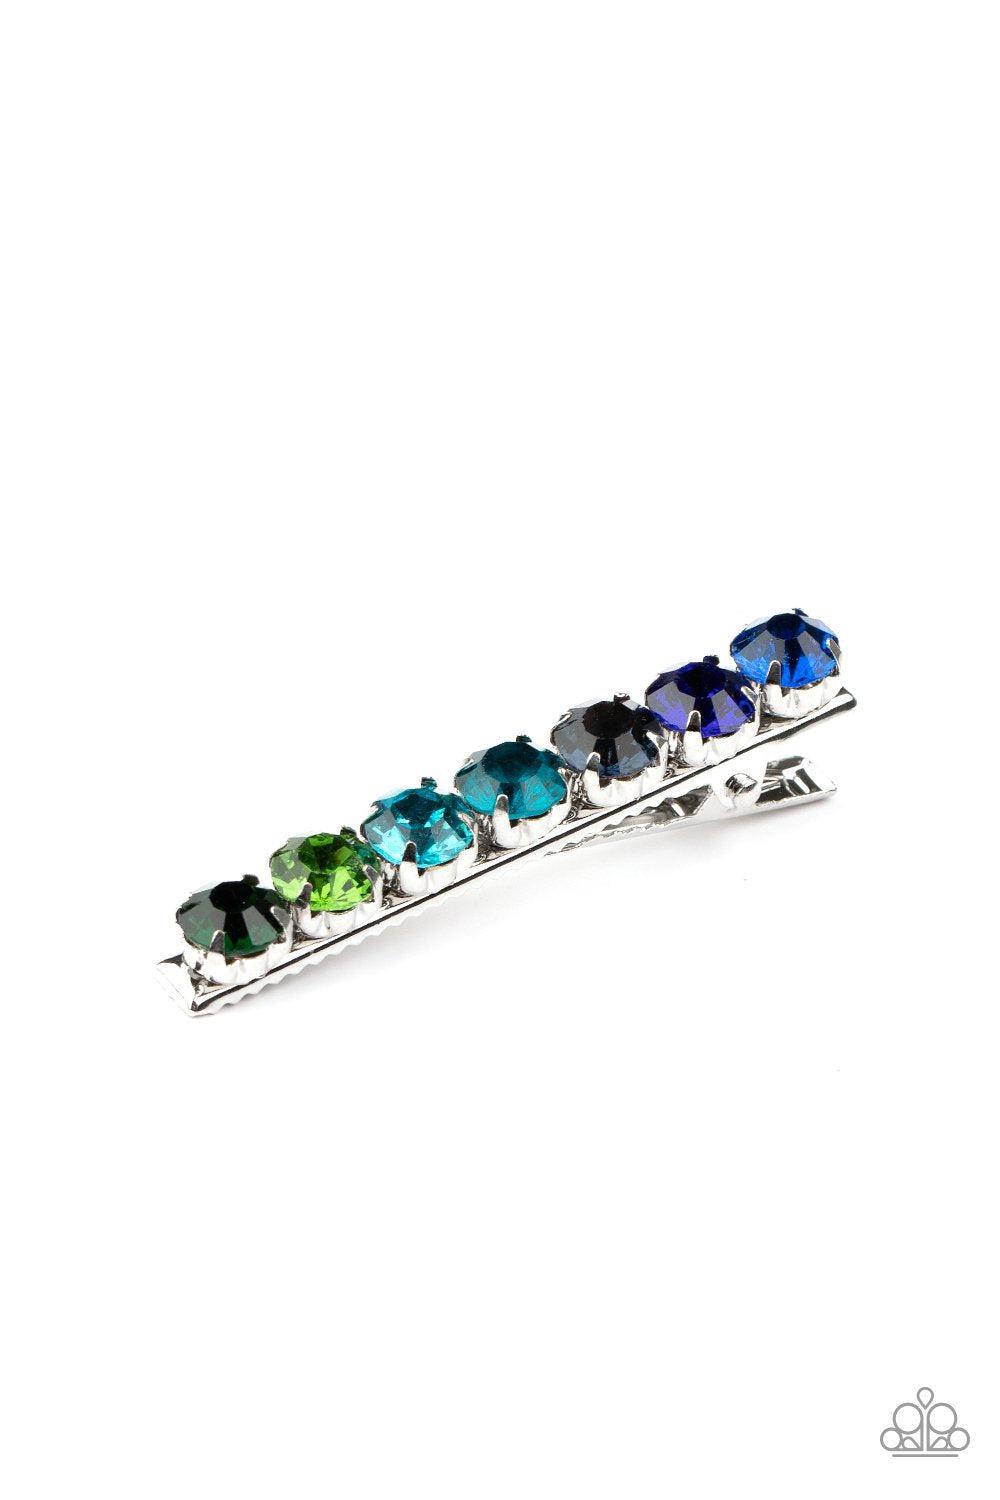 Bedazzling Beauty Multi-color Blue and Green Rhinestone Hair Clip - Paparazzi Accessories-CarasShop.com - $5 Jewelry by Cara Jewels